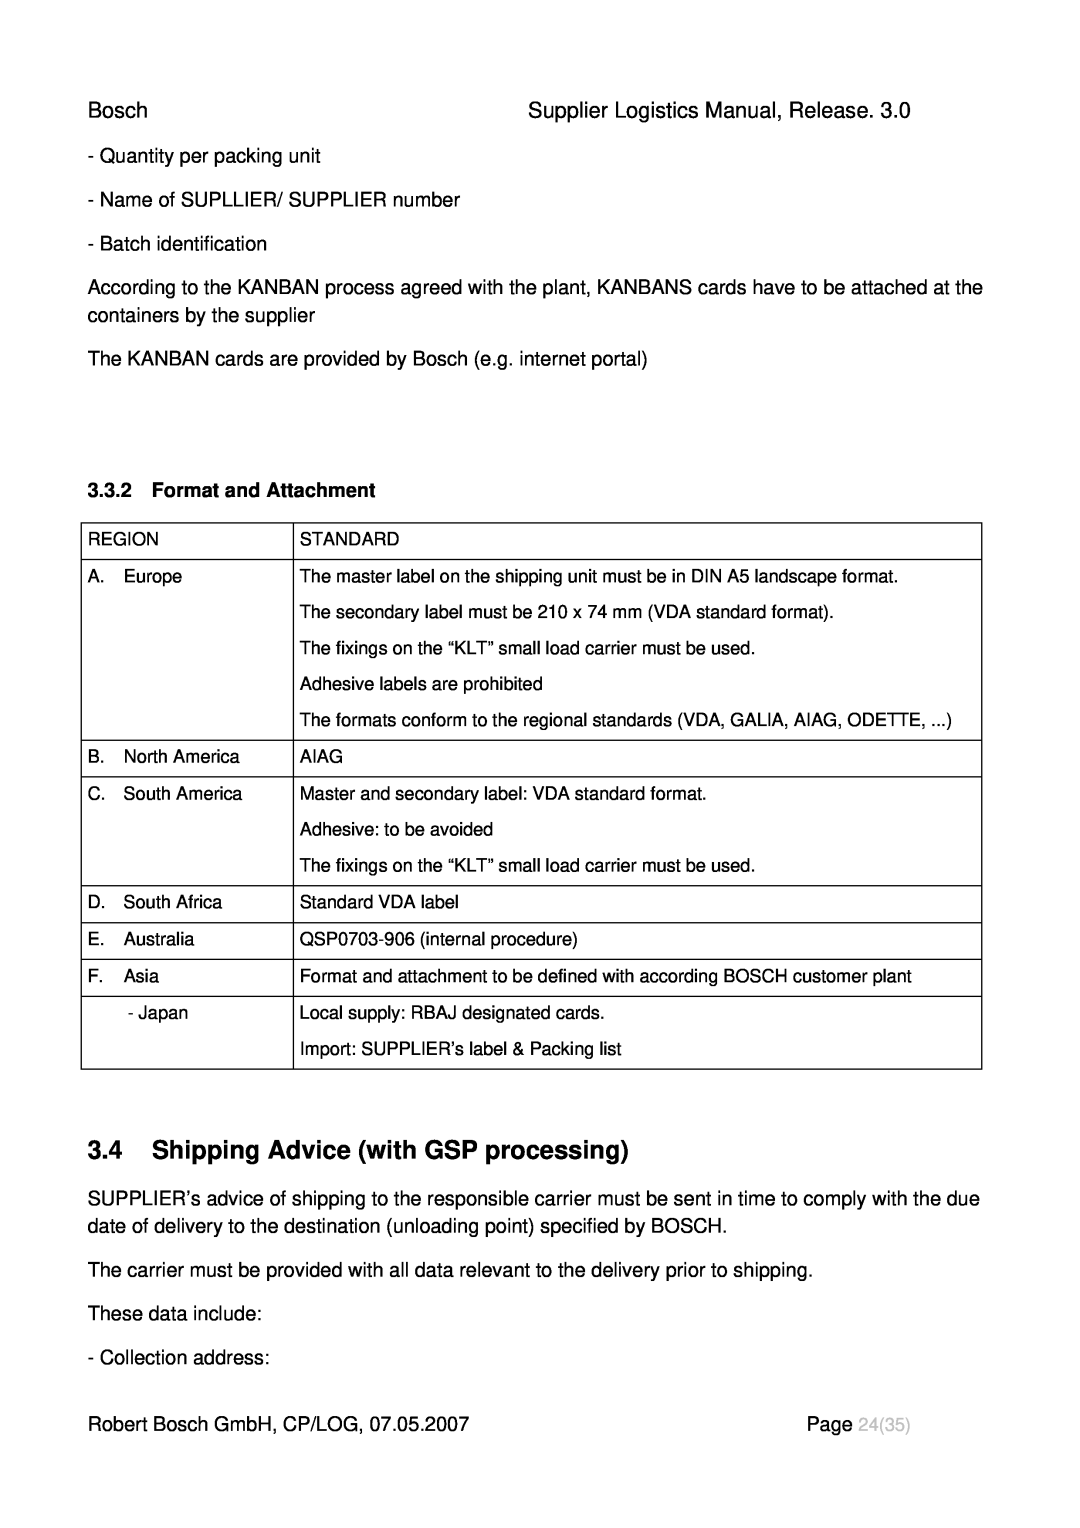 Bosch Appliances manual 3.4Shipping Advice with GSP processing, 3.3.2Format and Attachment, Bosch 